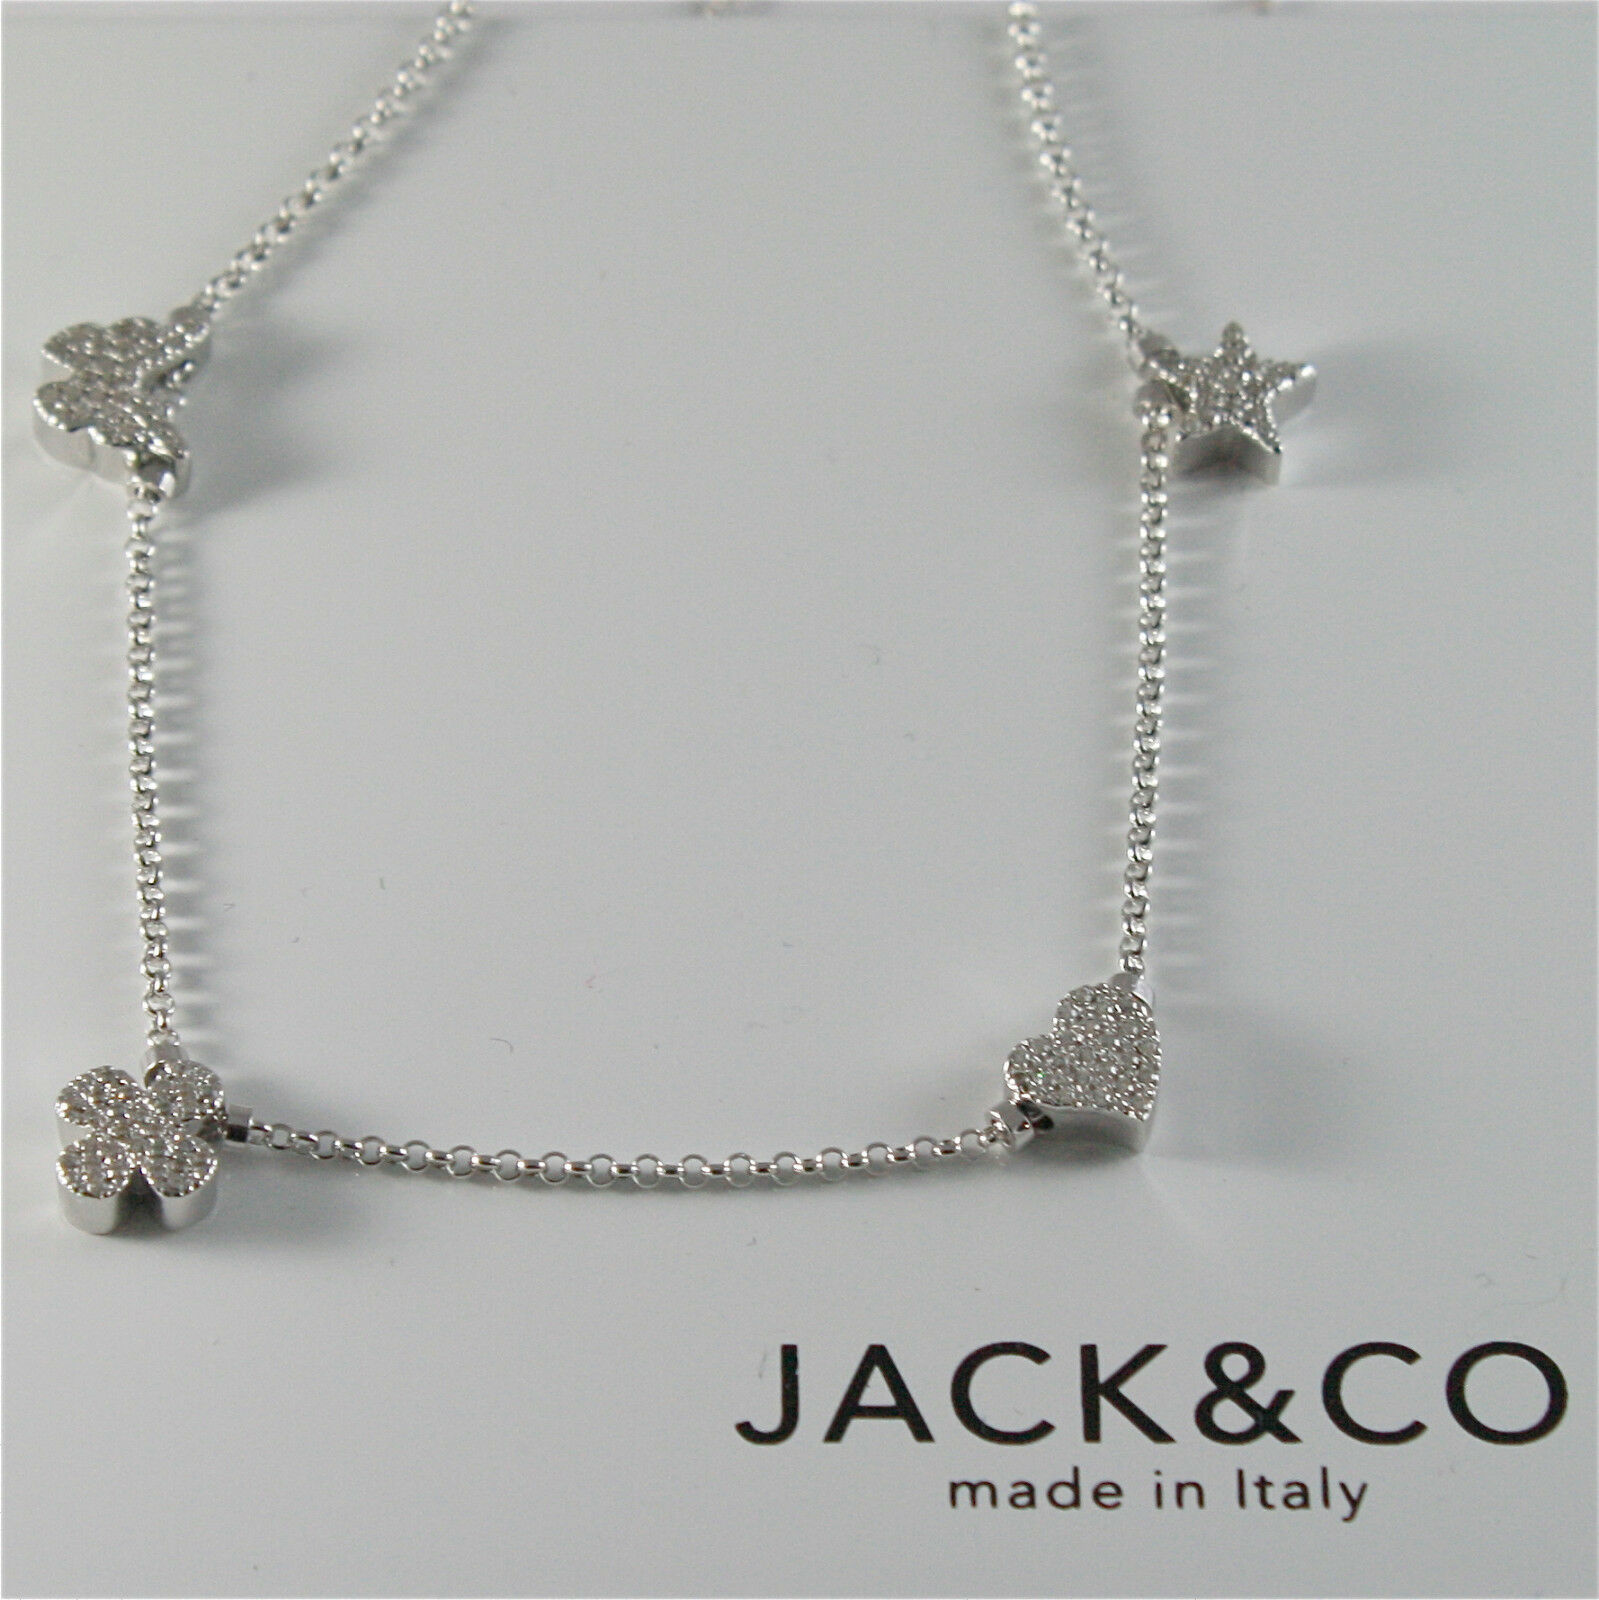 Primary image for 925 RHODIUM SILVER JACK&CO NECKLACE STAR BUTTERFLY HEART CLOVER MADE IN ITALY